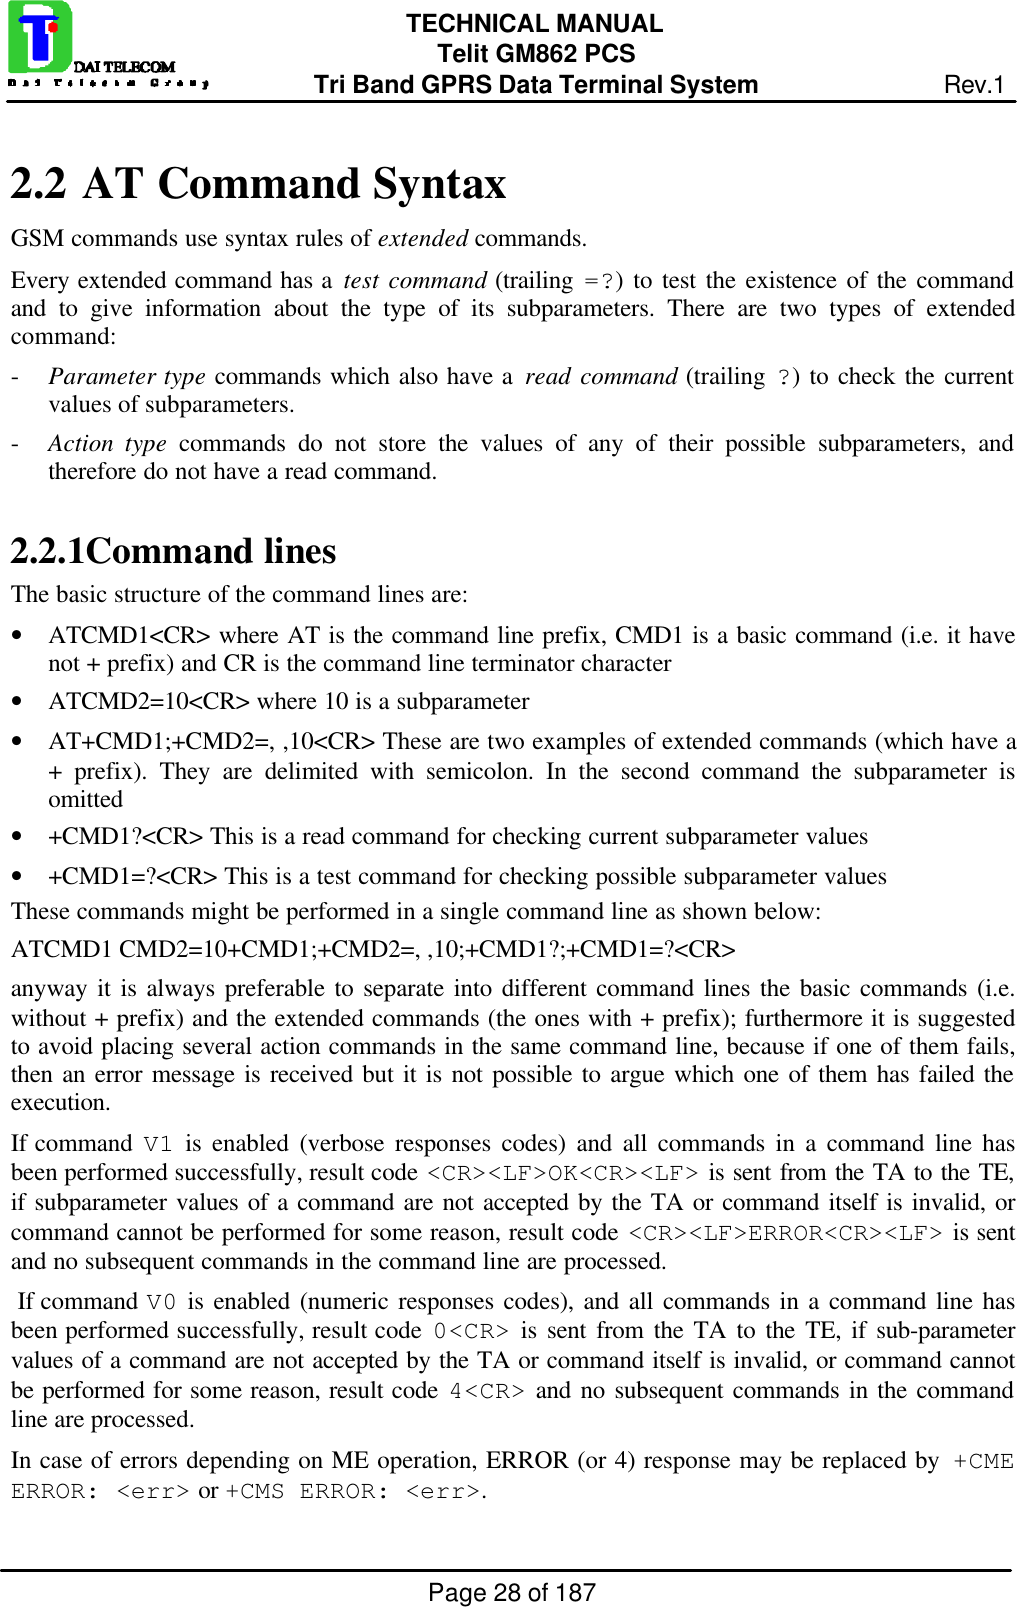 Page 28 of 187TECHNICAL MANUALTelit GM862 PCSTri Band GPRS Data Terminal System Rev.12.2  AT Command SyntaxGSM commands use syntax rules of extended commands.Every extended command has a test command (trailing =?) to test the existence of the commandand to give information about the type of its subparameters. There are two types of extendedcommand:- Parameter type commands which also have a read command (trailing ?) to check the currentvalues of subparameters.- Action type commands do not store the values of any of their possible subparameters, andtherefore do not have a read command.2.2.1 Command linesThe basic structure of the command lines are:• ATCMD1&lt;CR&gt; where AT is the command line prefix, CMD1 is a basic command (i.e. it havenot + prefix) and CR is the command line terminator character• ATCMD2=10&lt;CR&gt; where 10 is a subparameter• AT+CMD1;+CMD2=, ,10&lt;CR&gt; These are two examples of extended commands (which have a+ prefix). They are delimited with semicolon. In the second command the subparameter isomitted• +CMD1?&lt;CR&gt; This is a read command for checking current subparameter values• +CMD1=?&lt;CR&gt; This is a test command for checking possible subparameter valuesThese commands might be performed in a single command line as shown below:ATCMD1 CMD2=10+CMD1;+CMD2=, ,10;+CMD1?;+CMD1=?&lt;CR&gt;anyway it is always preferable to separate into different command lines the basic commands (i.e.without + prefix) and the extended commands (the ones with + prefix); furthermore it is suggestedto avoid placing several action commands in the same command line, because if one of them fails,then an error message is received but it is not possible to argue which one of them has failed theexecution.If command V1 is enabled (verbose responses codes) and all commands in a command line hasbeen performed successfully, result code &lt;CR&gt;&lt;LF&gt;OK&lt;CR&gt;&lt;LF&gt; is sent from the TA to the TE,if subparameter values of a command are not accepted by the TA or command itself is invalid, orcommand cannot be performed for some reason, result code &lt;CR&gt;&lt;LF&gt;ERROR&lt;CR&gt;&lt;LF&gt; is sentand no subsequent commands in the command line are processed. If command V0 is enabled (numeric responses codes), and all commands in a command line hasbeen performed successfully, result code 0&lt;CR&gt; is sent from the TA to the TE, if sub-parametervalues of a command are not accepted by the TA or command itself is invalid, or command cannotbe performed for some reason, result code 4&lt;CR&gt; and no subsequent commands in the commandline are processed.In case of errors depending on ME operation, ERROR (or 4) response may be replaced by  +CMEERROR: &lt;err&gt; or +CMS ERROR: &lt;err&gt;.